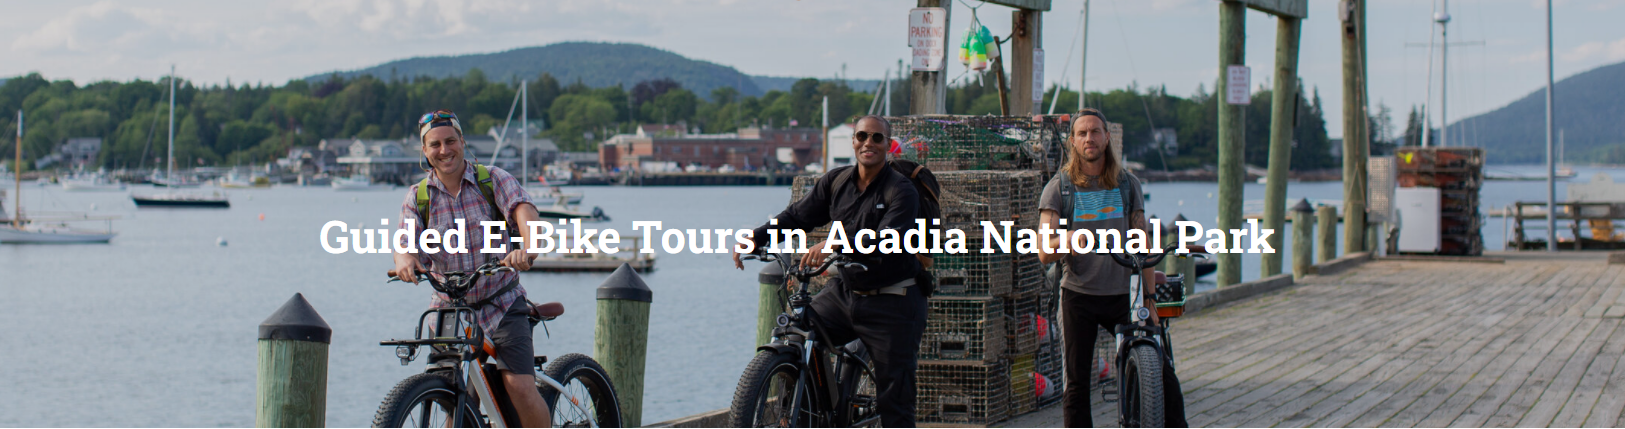 Guided E-Bike Tours in Acadia National Park  - Rising Sun Adventure Tours - Bass Harbor - Maine SBDC